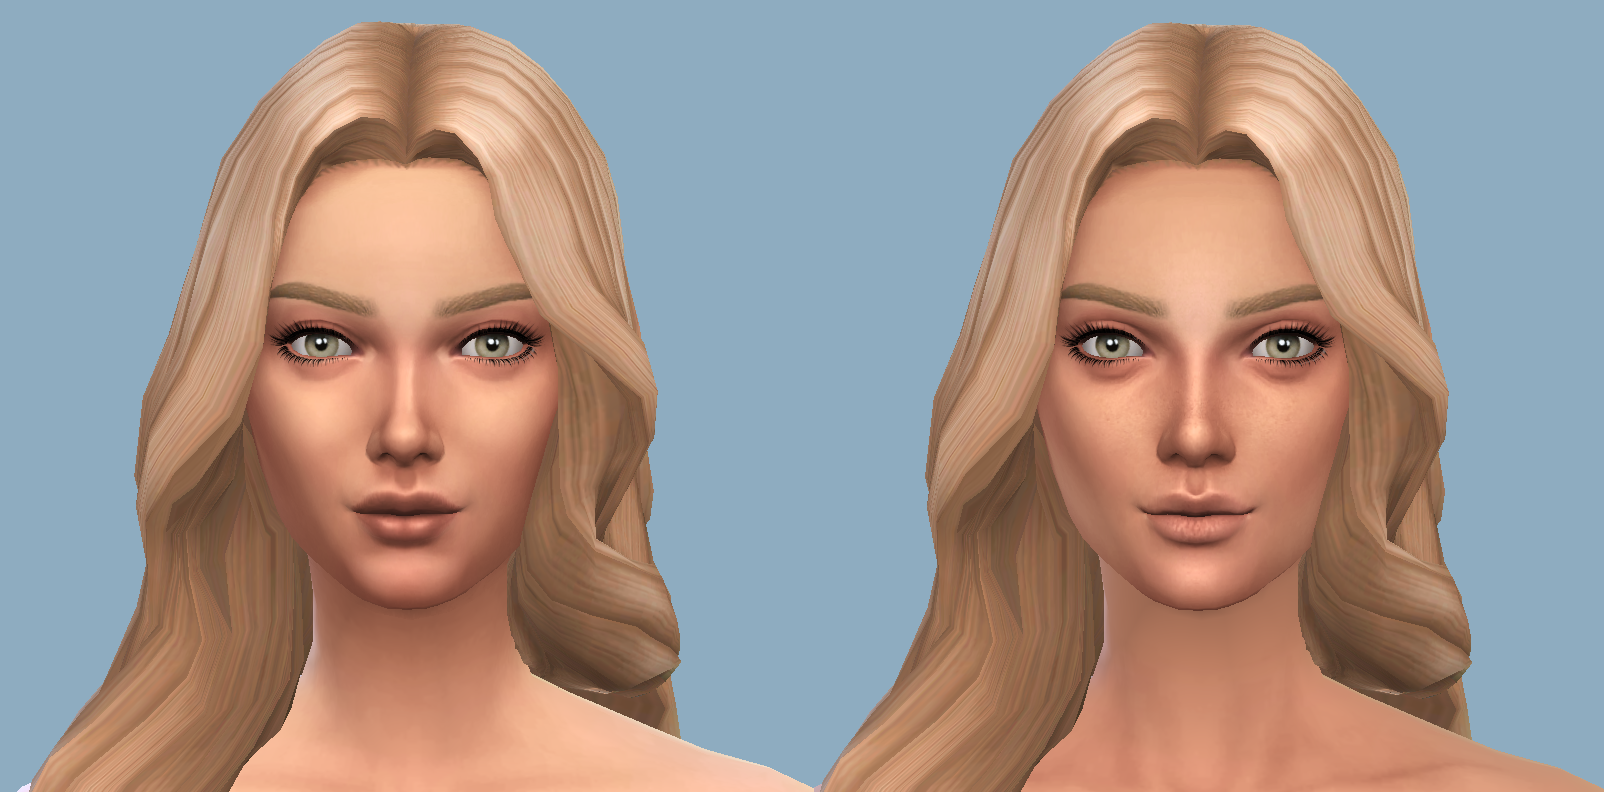 skin maxis match the sims 4